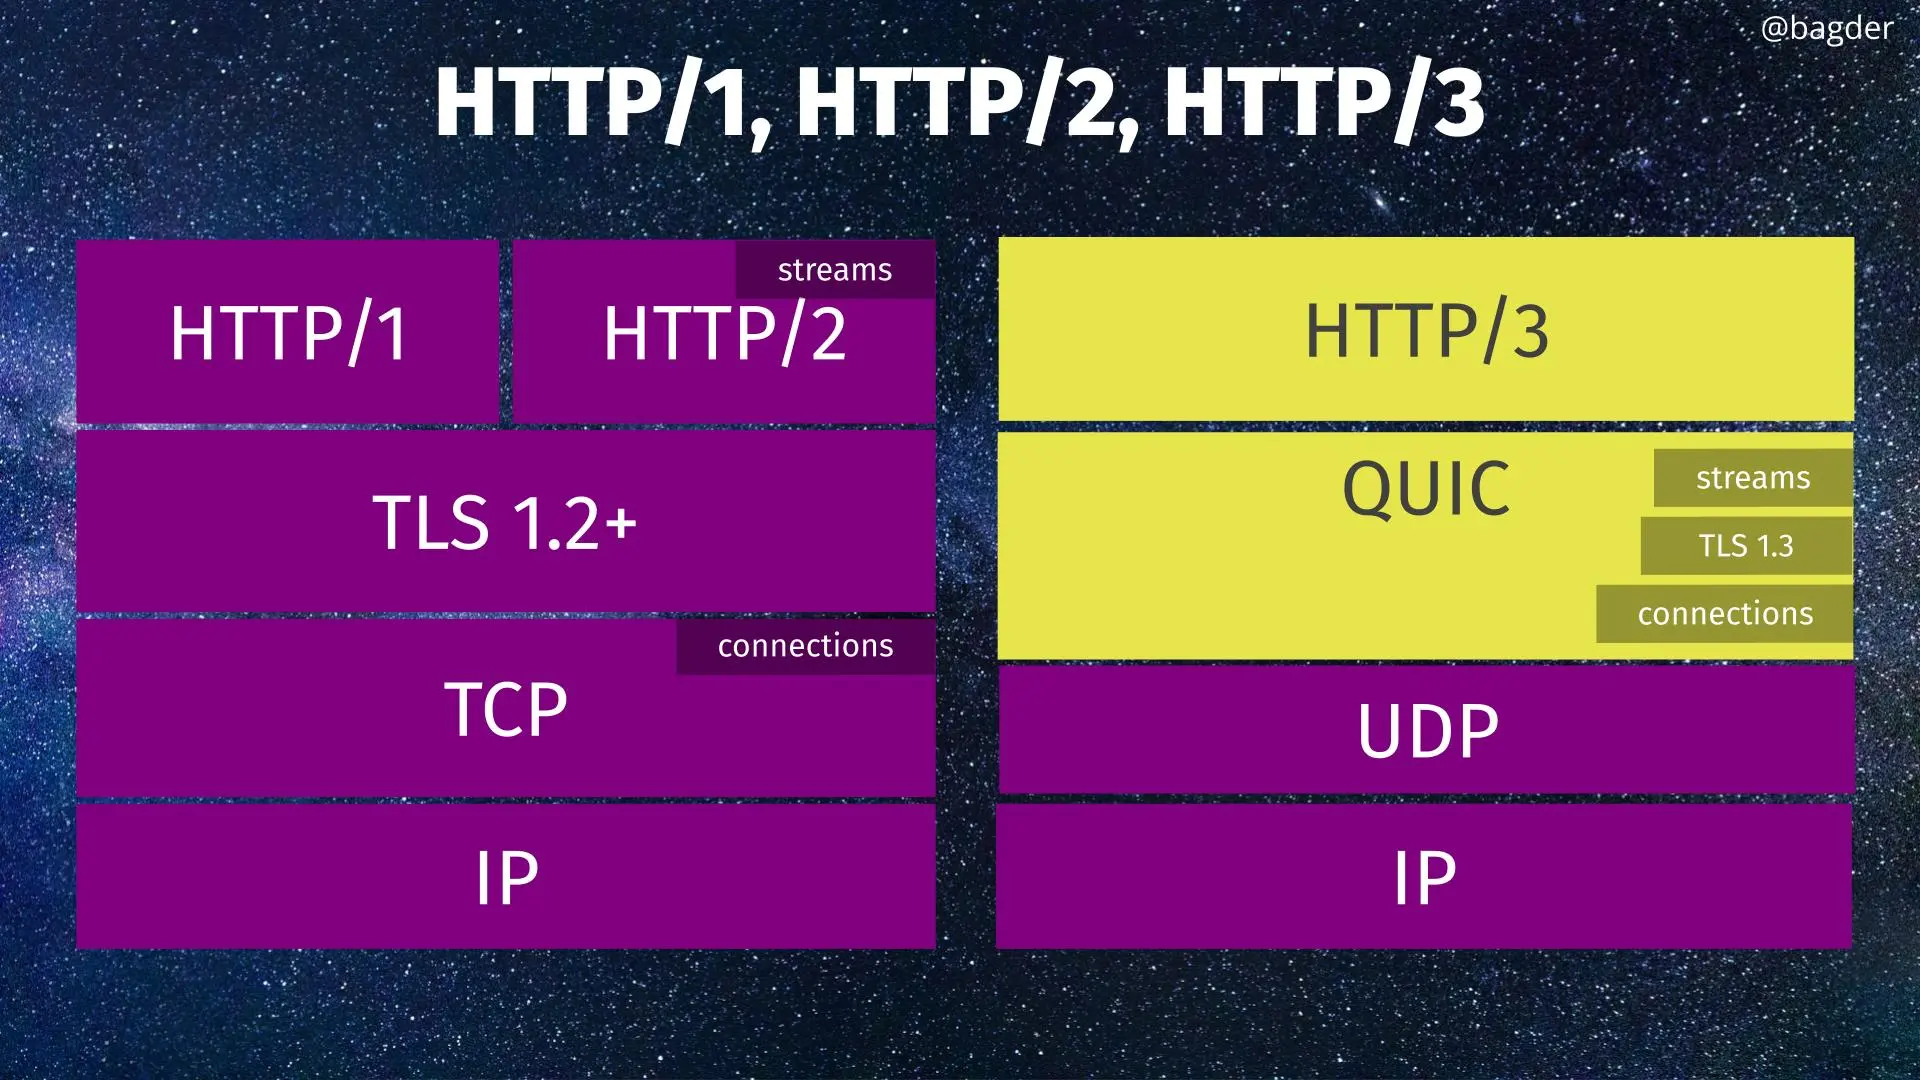 relationship between the HTTP protocols and their components